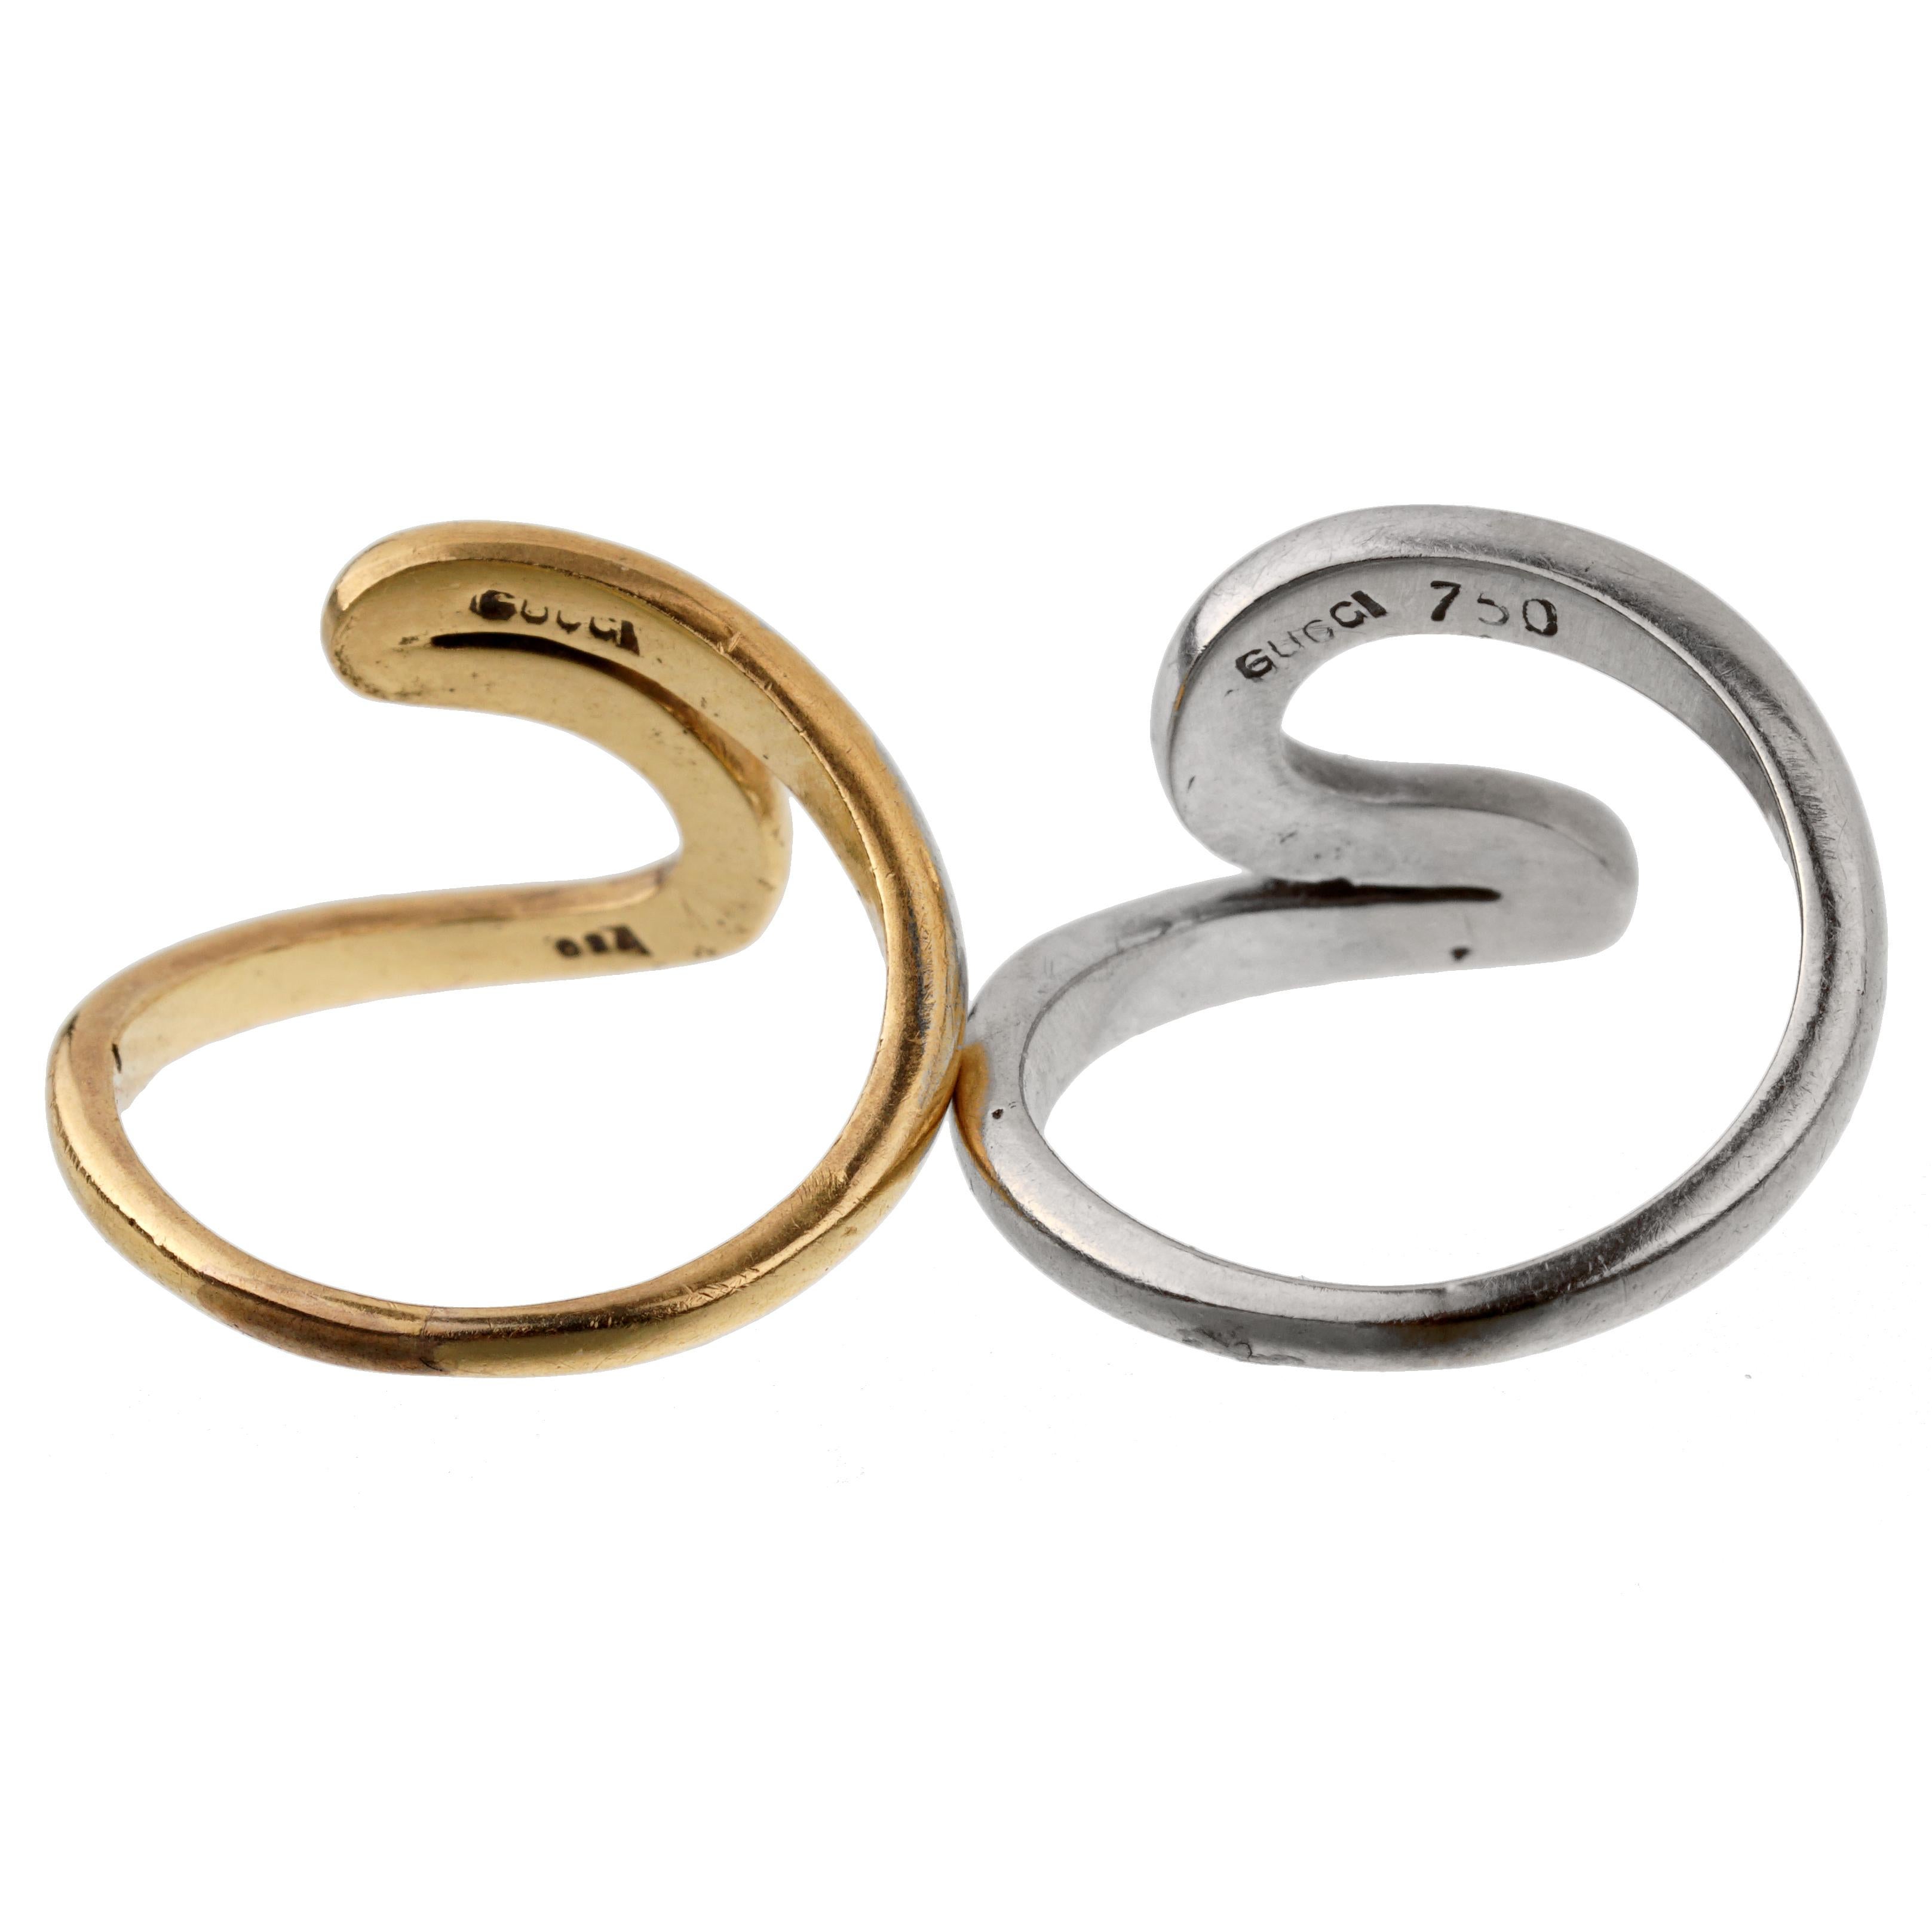 A set of vintage Gucci swirl rings one in 18k yellow gold and one in 18k white gold. The rings can be worn together and or separately. The rings measure a size 3 1/4 and can be resized if needed.